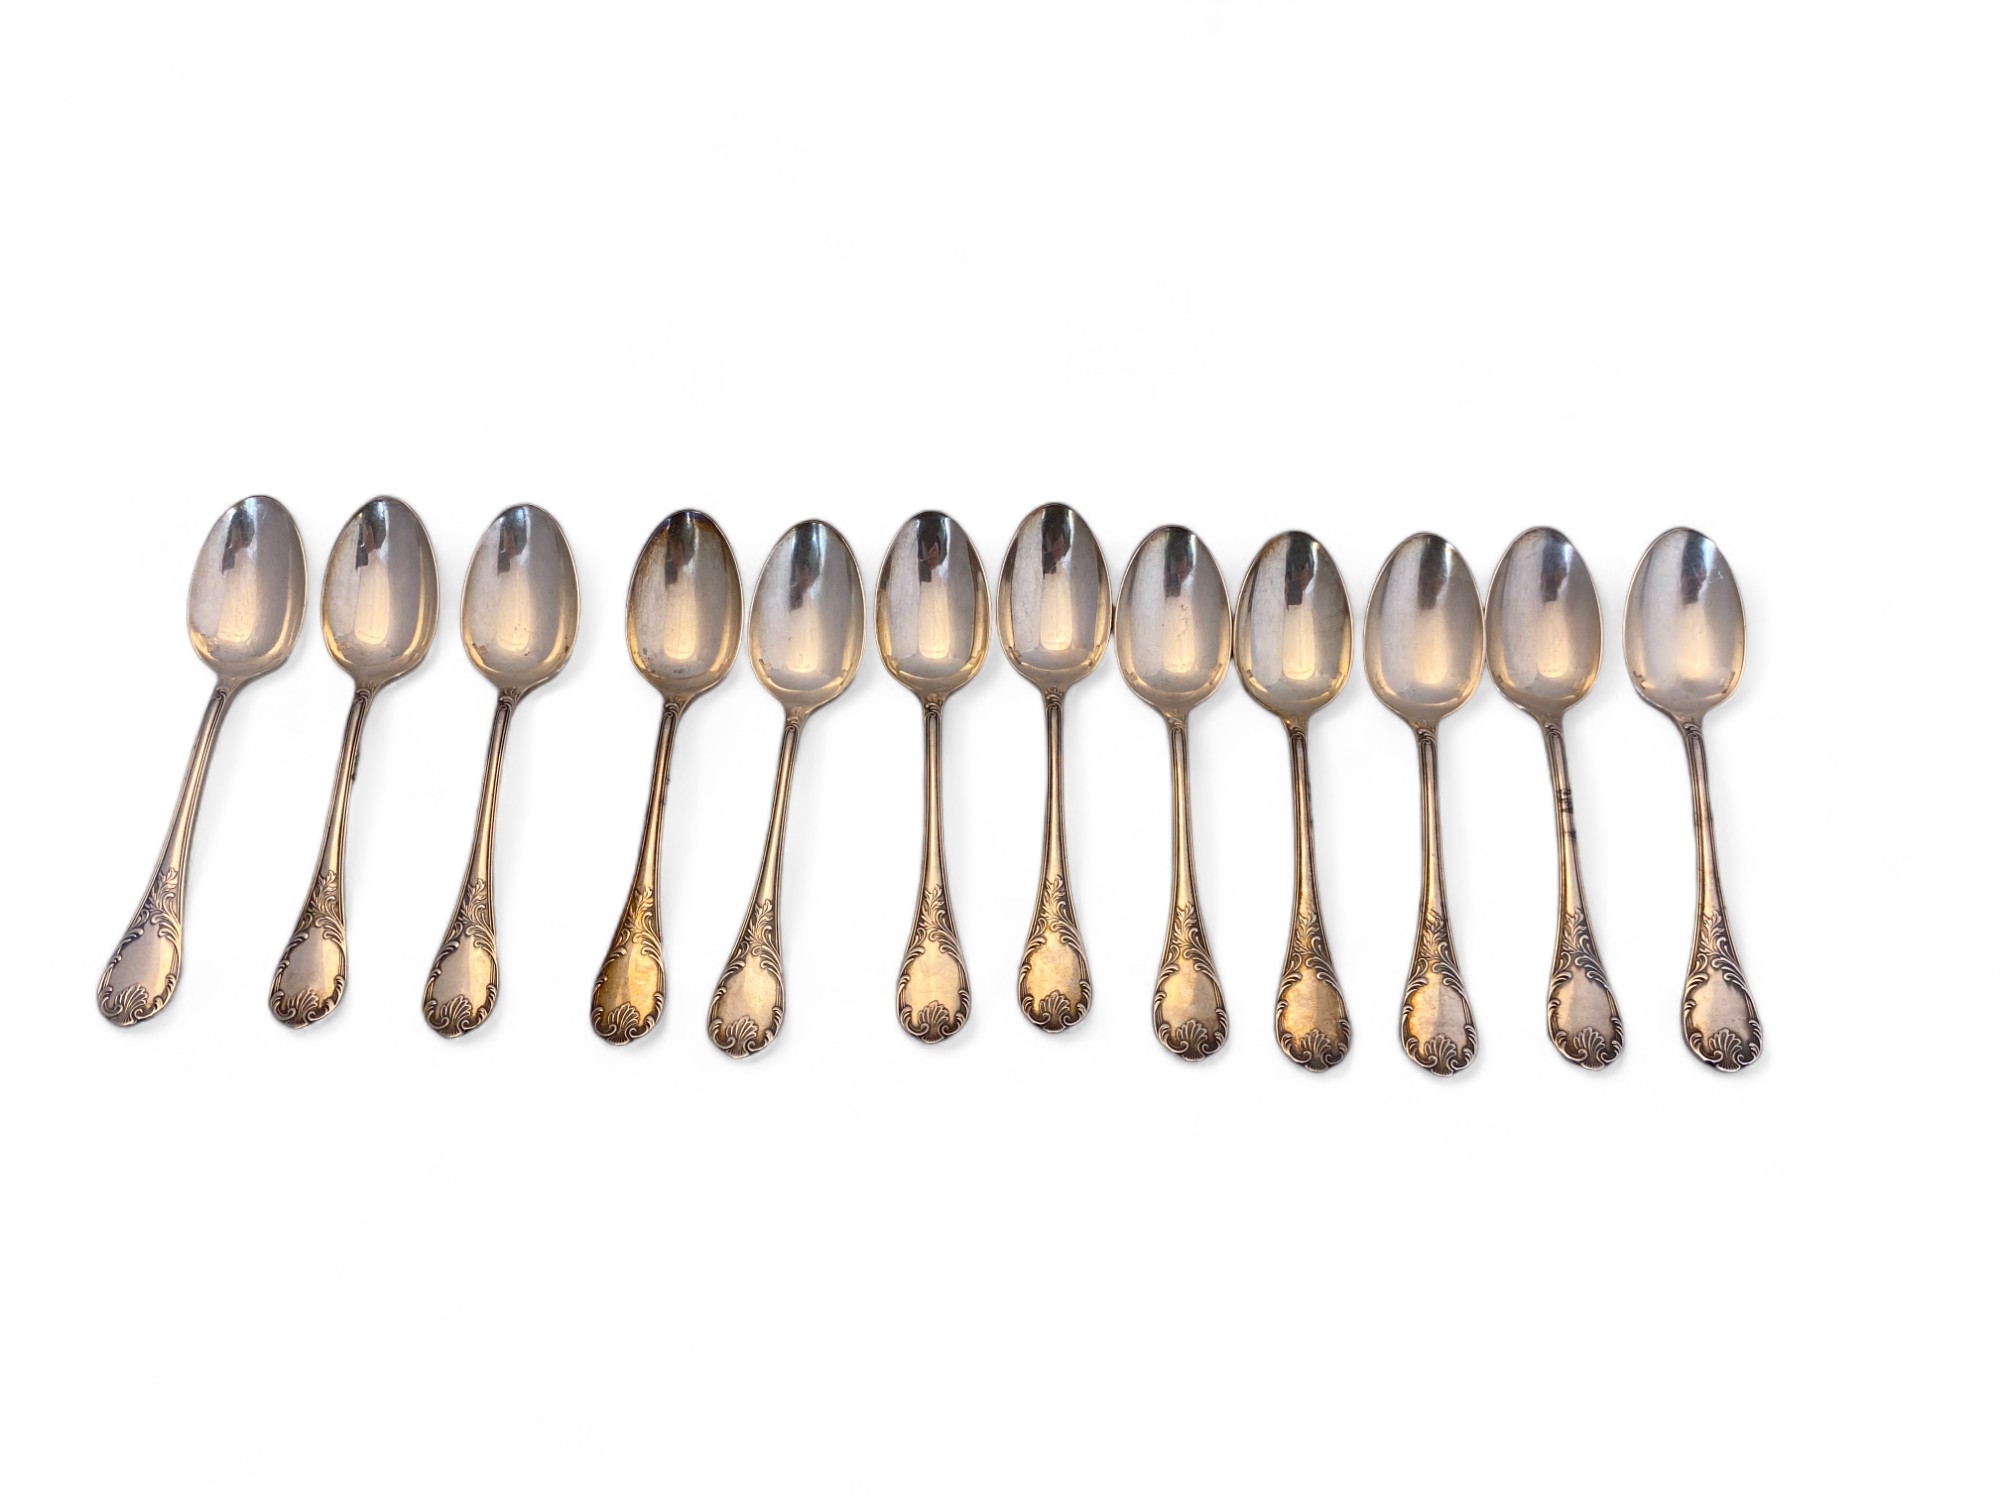 An extensive composite canteen of mostly silver plated Marly pattern cutlery by Christofle, Paris - Image 38 of 99